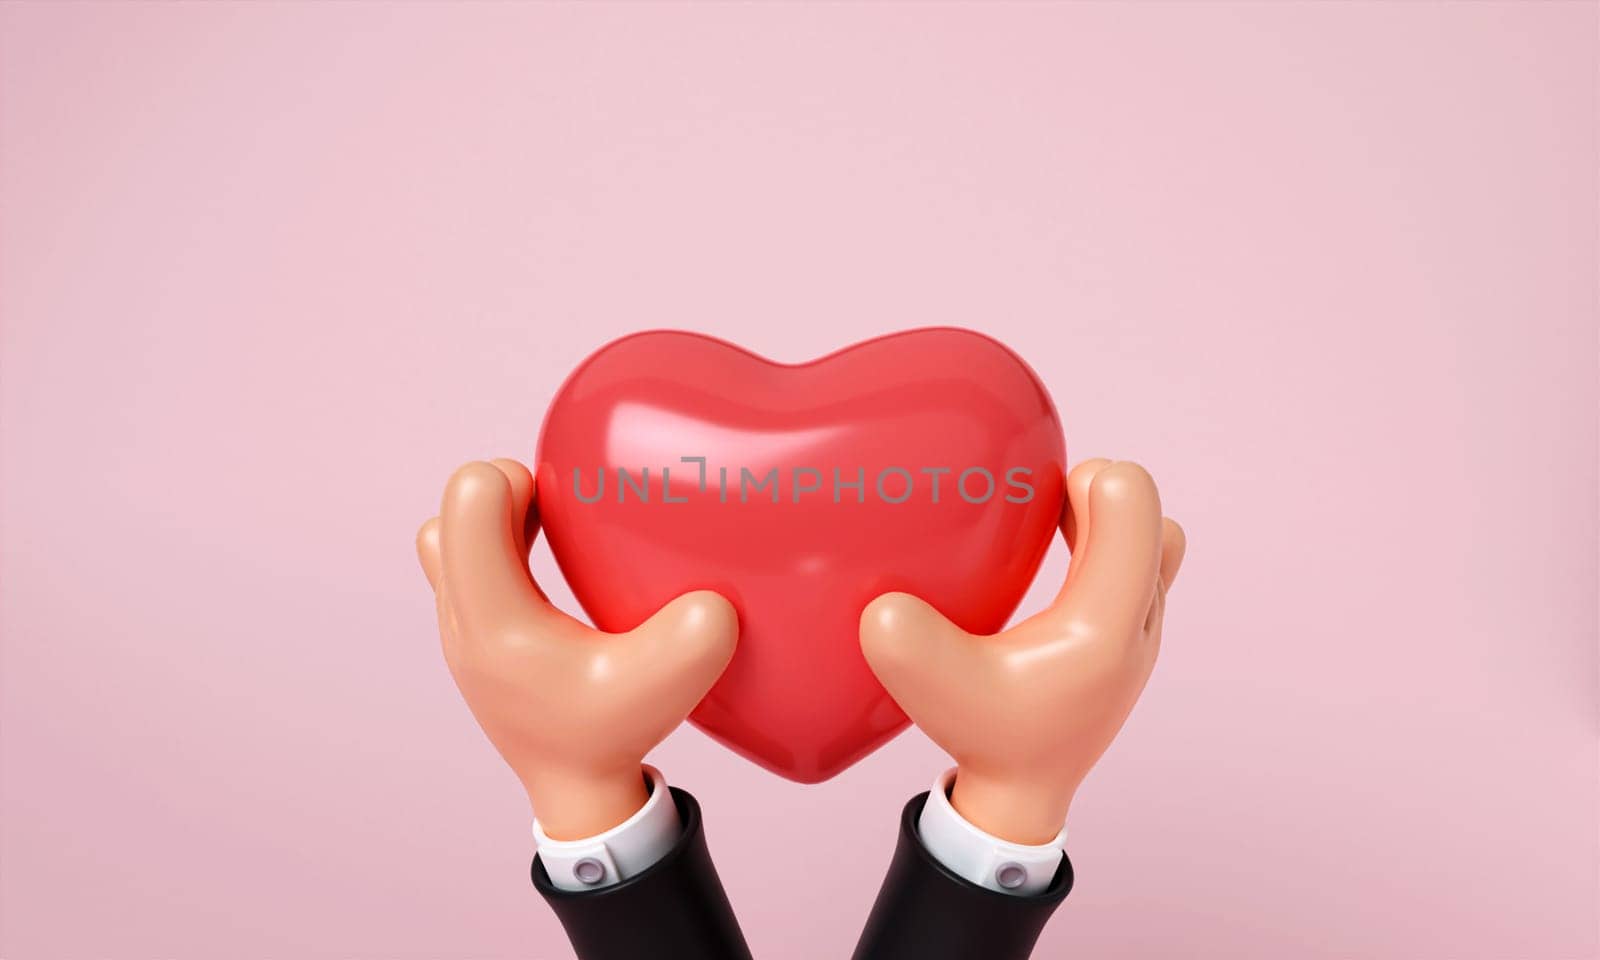 Cartoon Hands holding a red heart on pink background, heart donate concept, world health day, charity donation, 3D render illustration.